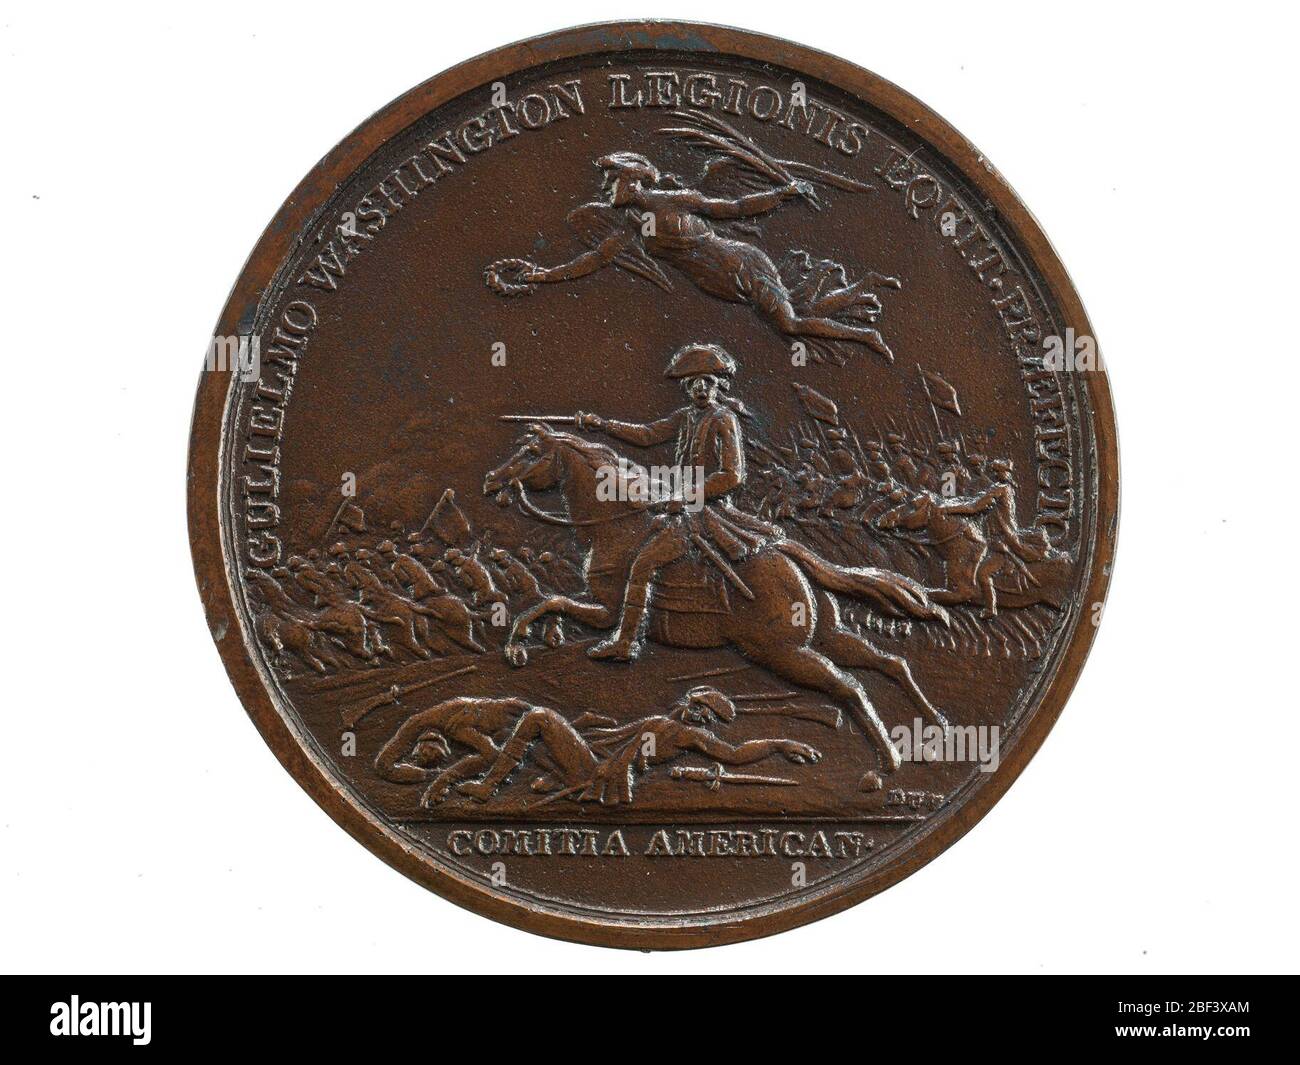 William Washington at the Cowpens United States 1781. One (1) William Washington at the Cowpens medal, (Comitia Americana)United States (France), 1781Obverse Image: Washington sits on a horse with sword drawn, leading the 3rd Continental Light Dragoons who charge in the background against the British cavalry. Stock Photo